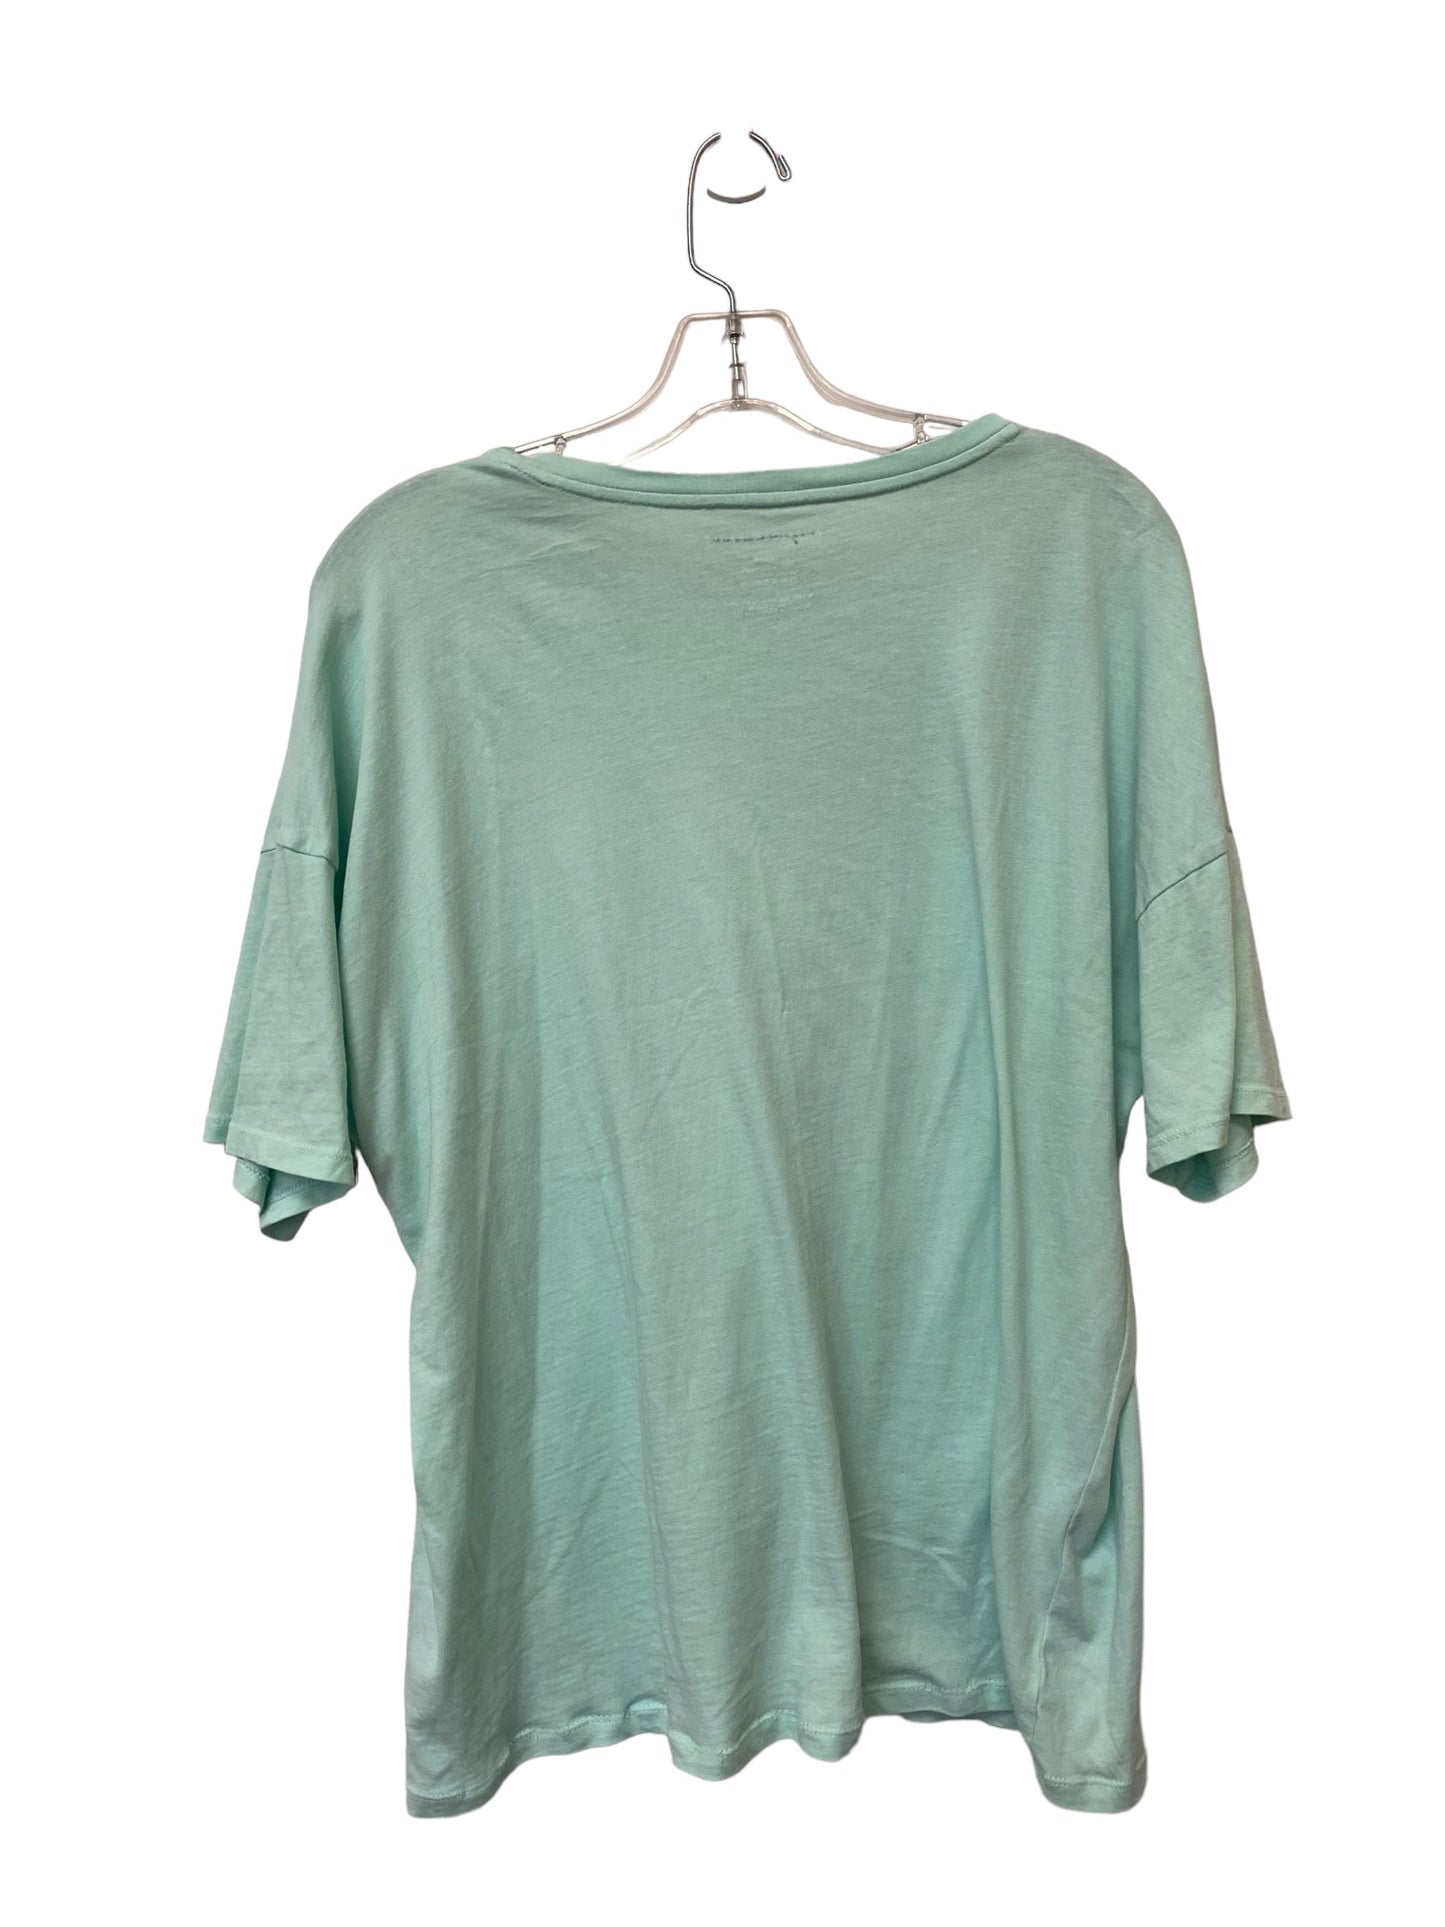 Green Top Short Sleeve American Eagle, Size L